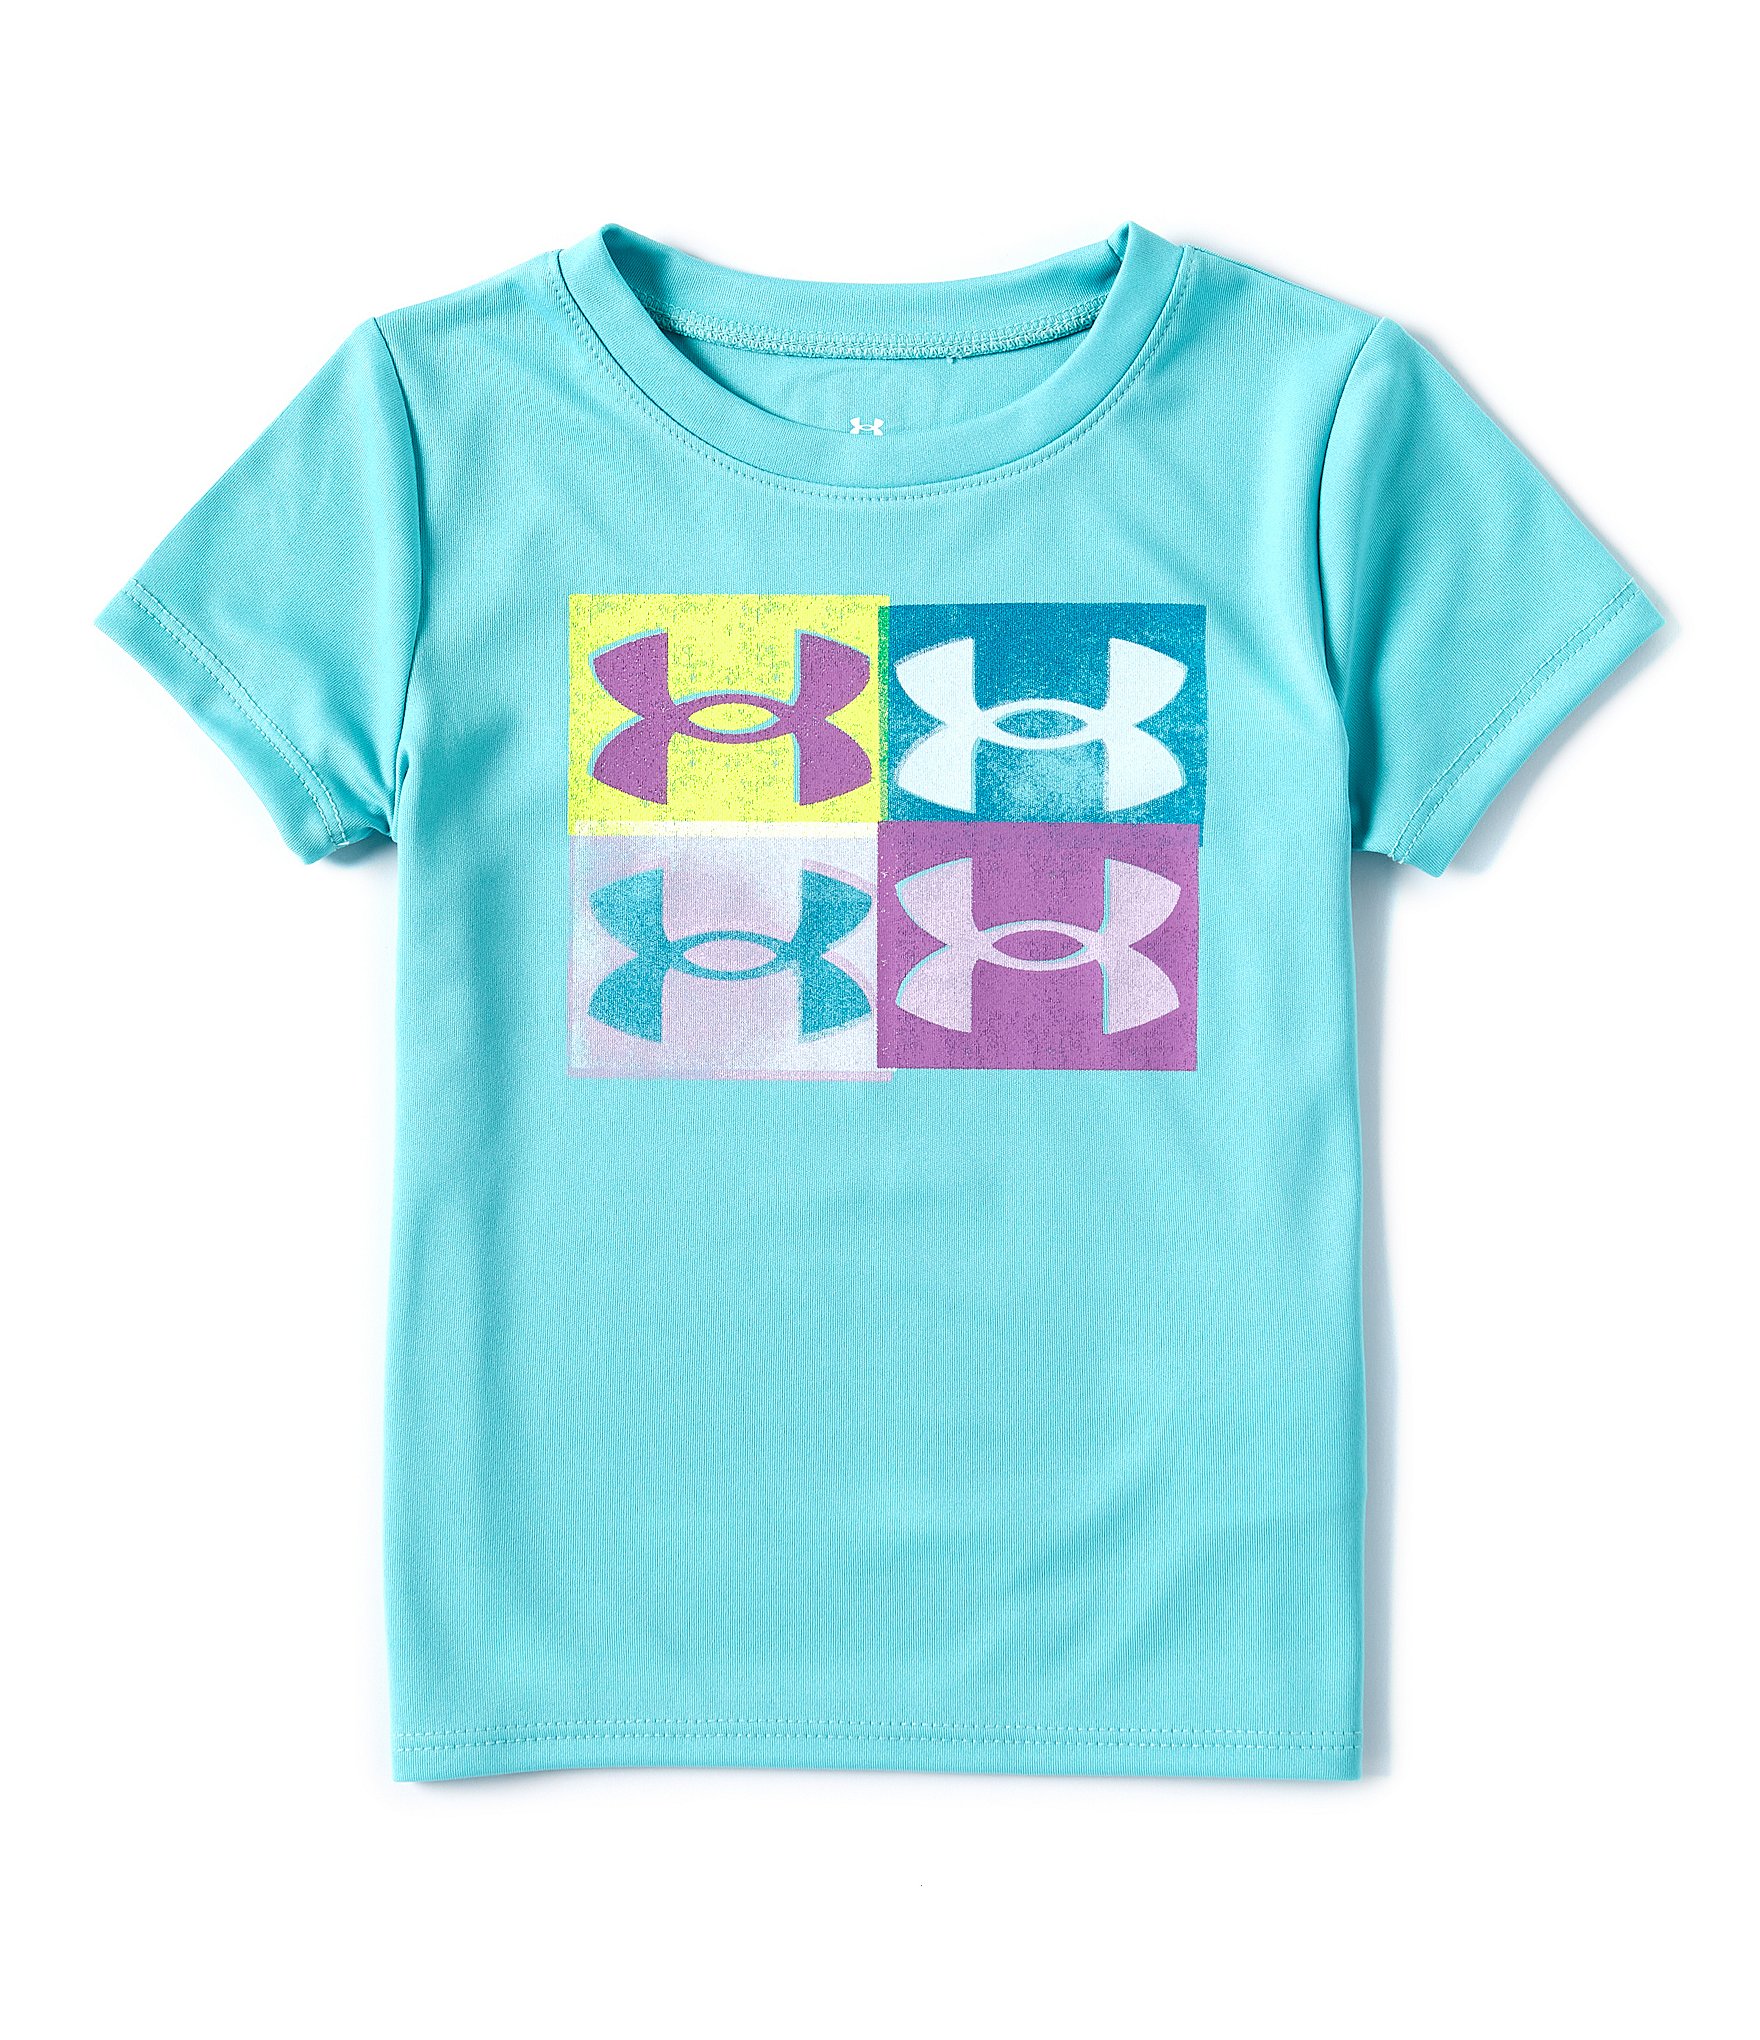 Under Armour Girls' Big Logo T-Shirt Novelty Short Sleeve T-Shirt, Coded  Blue (451)/High-Vis Yellow, Youth X-Small 